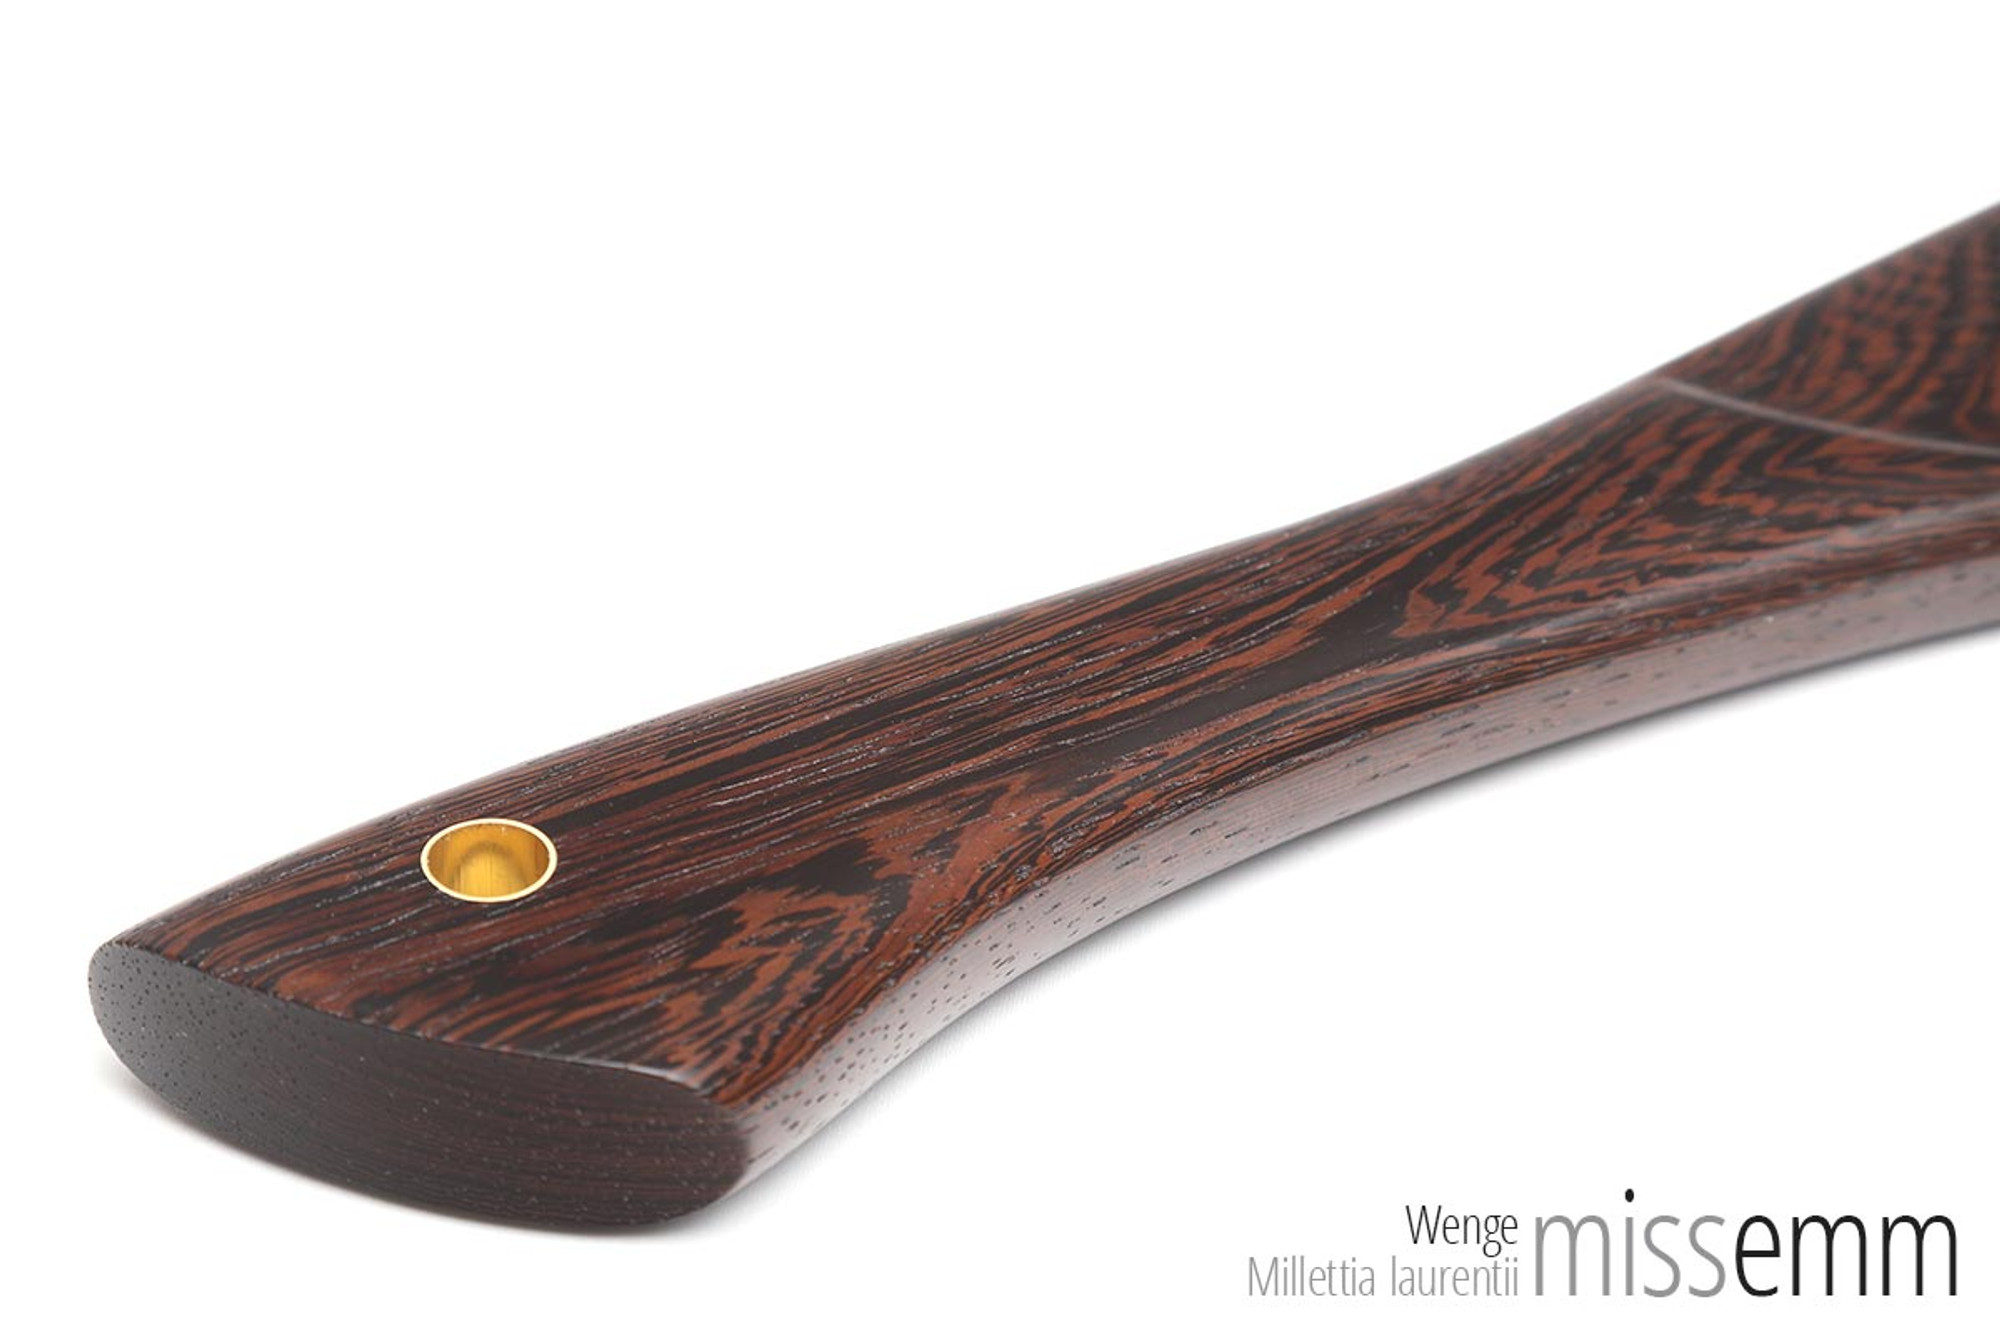 BDSM Paddle in Walnut Wood, Handcrafted Wooden Spanking Paddle With Holes,  Kinky Toys for Sub and Dom and Other BDSM Fetishes 